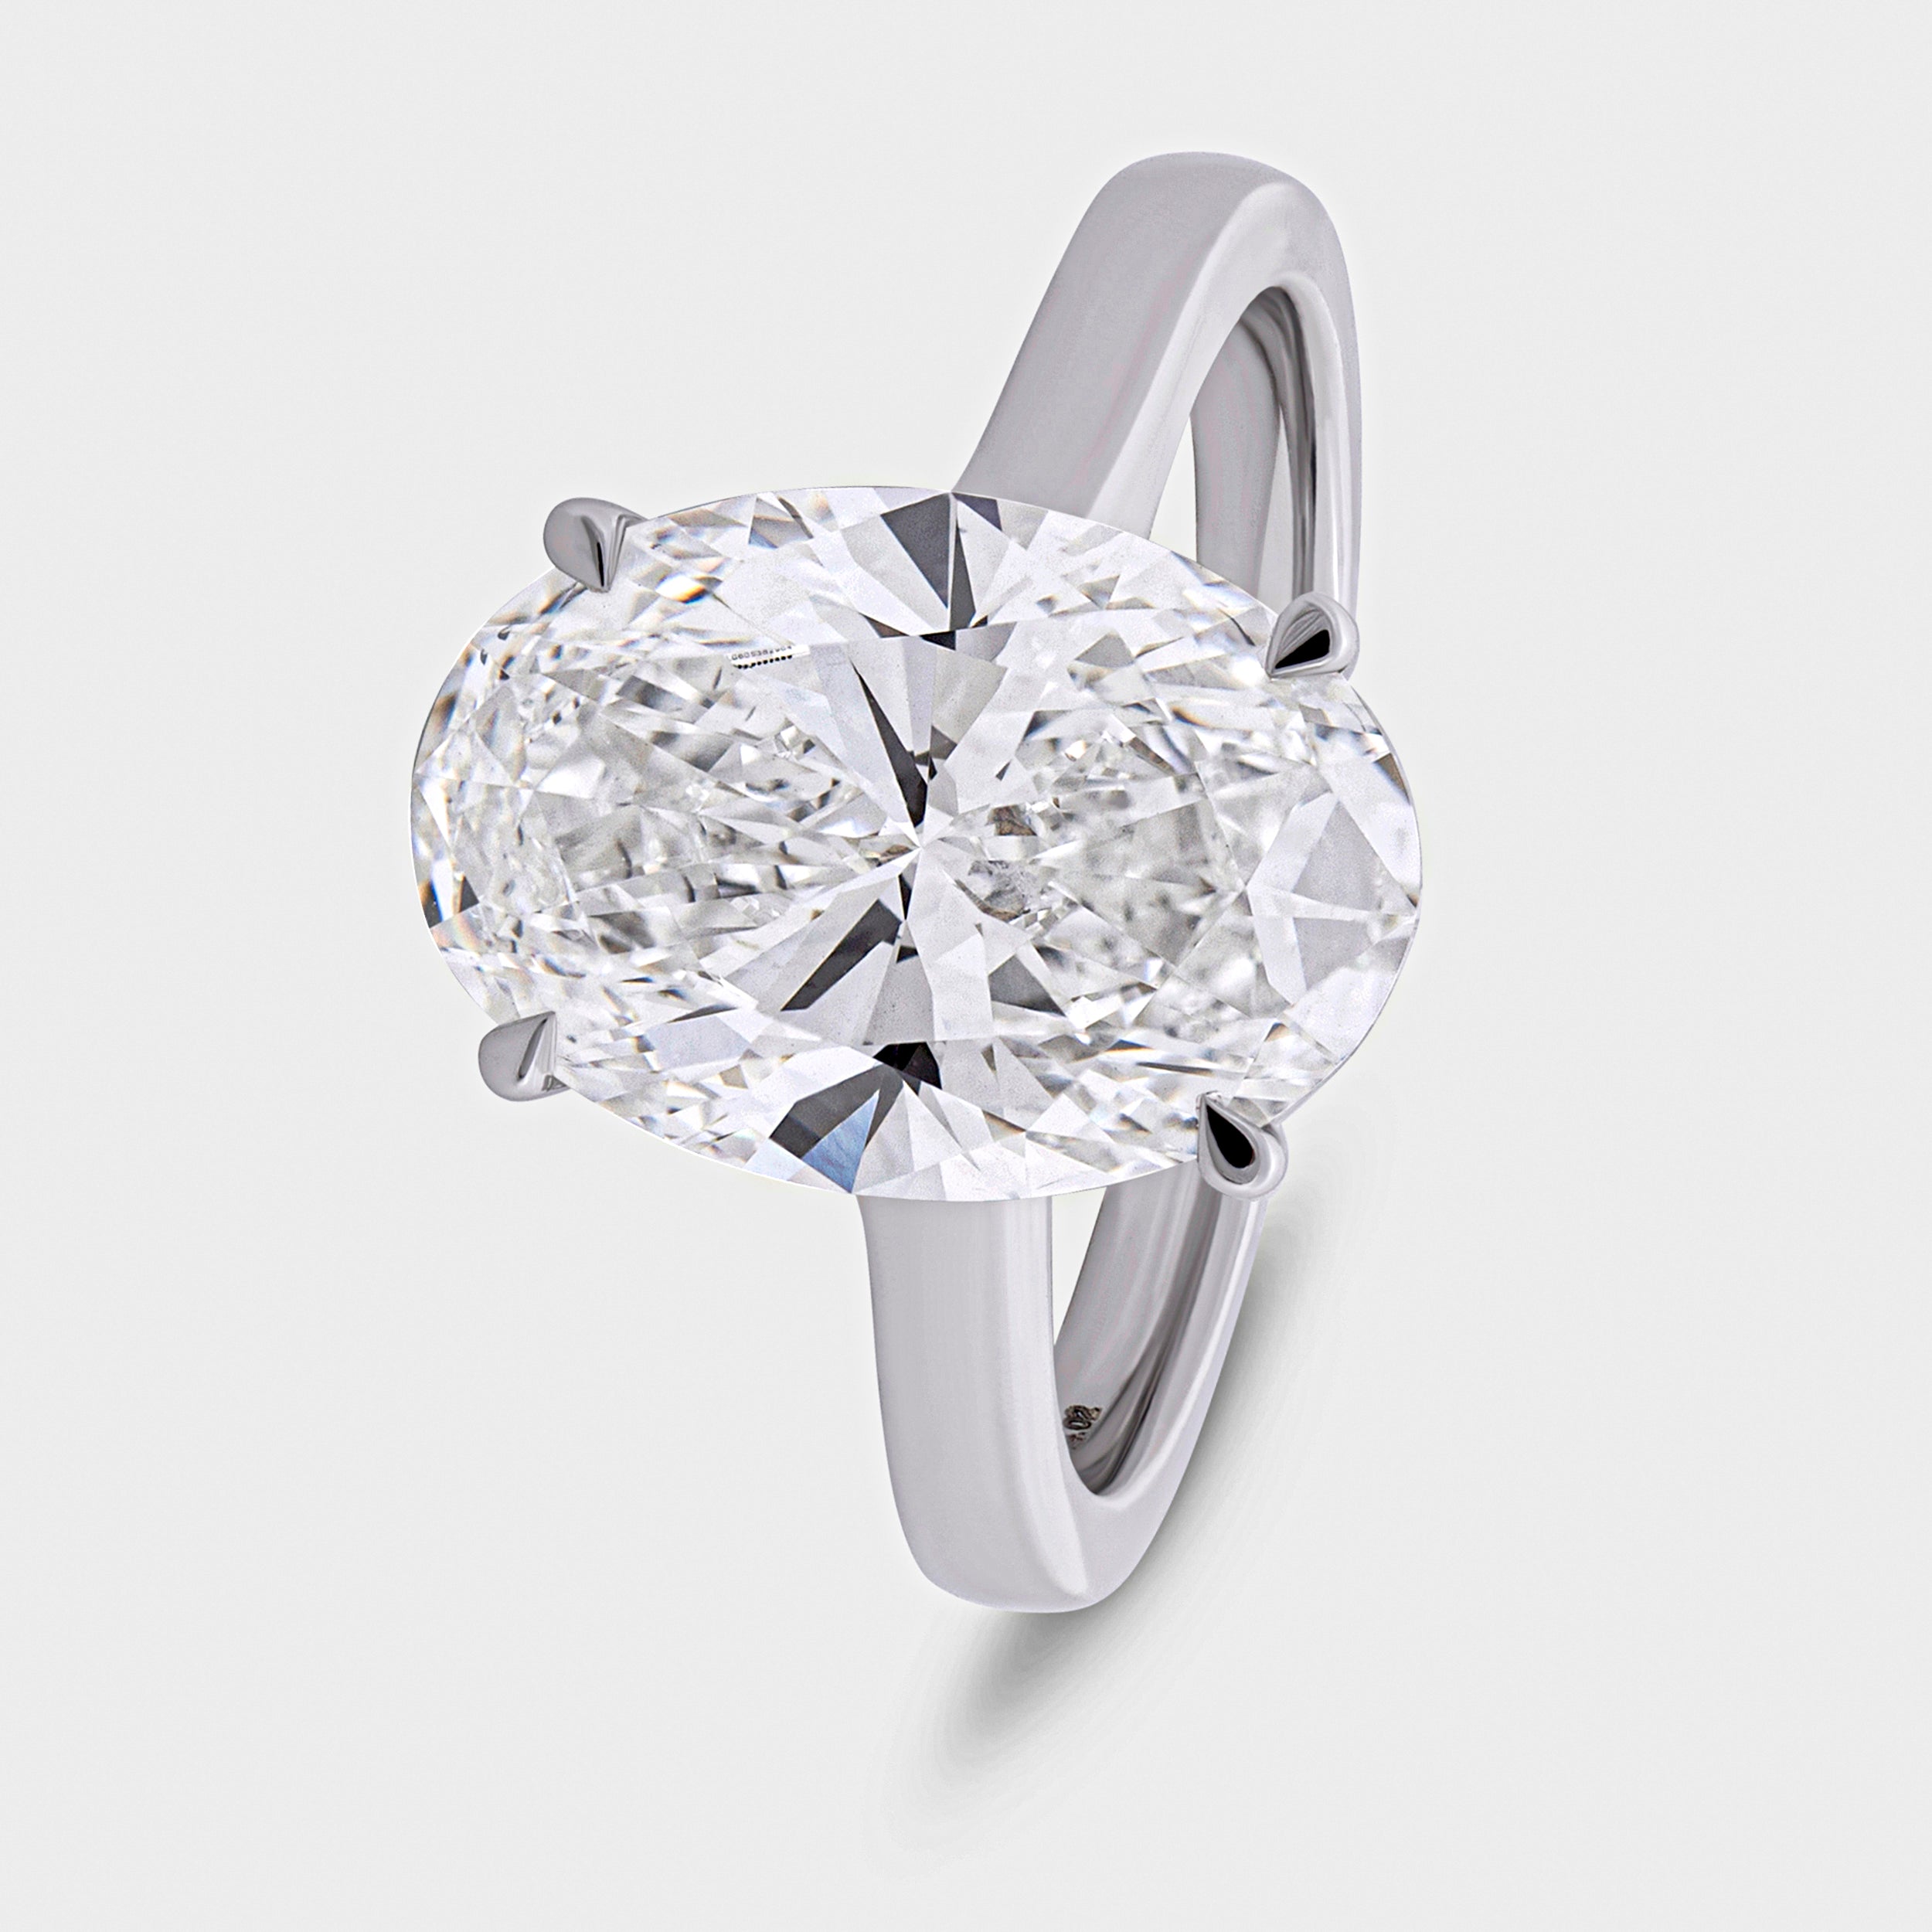 Oval Shaped 4.02 Carat Lab-Grown Solitaire Ring | SKU : 0020246006